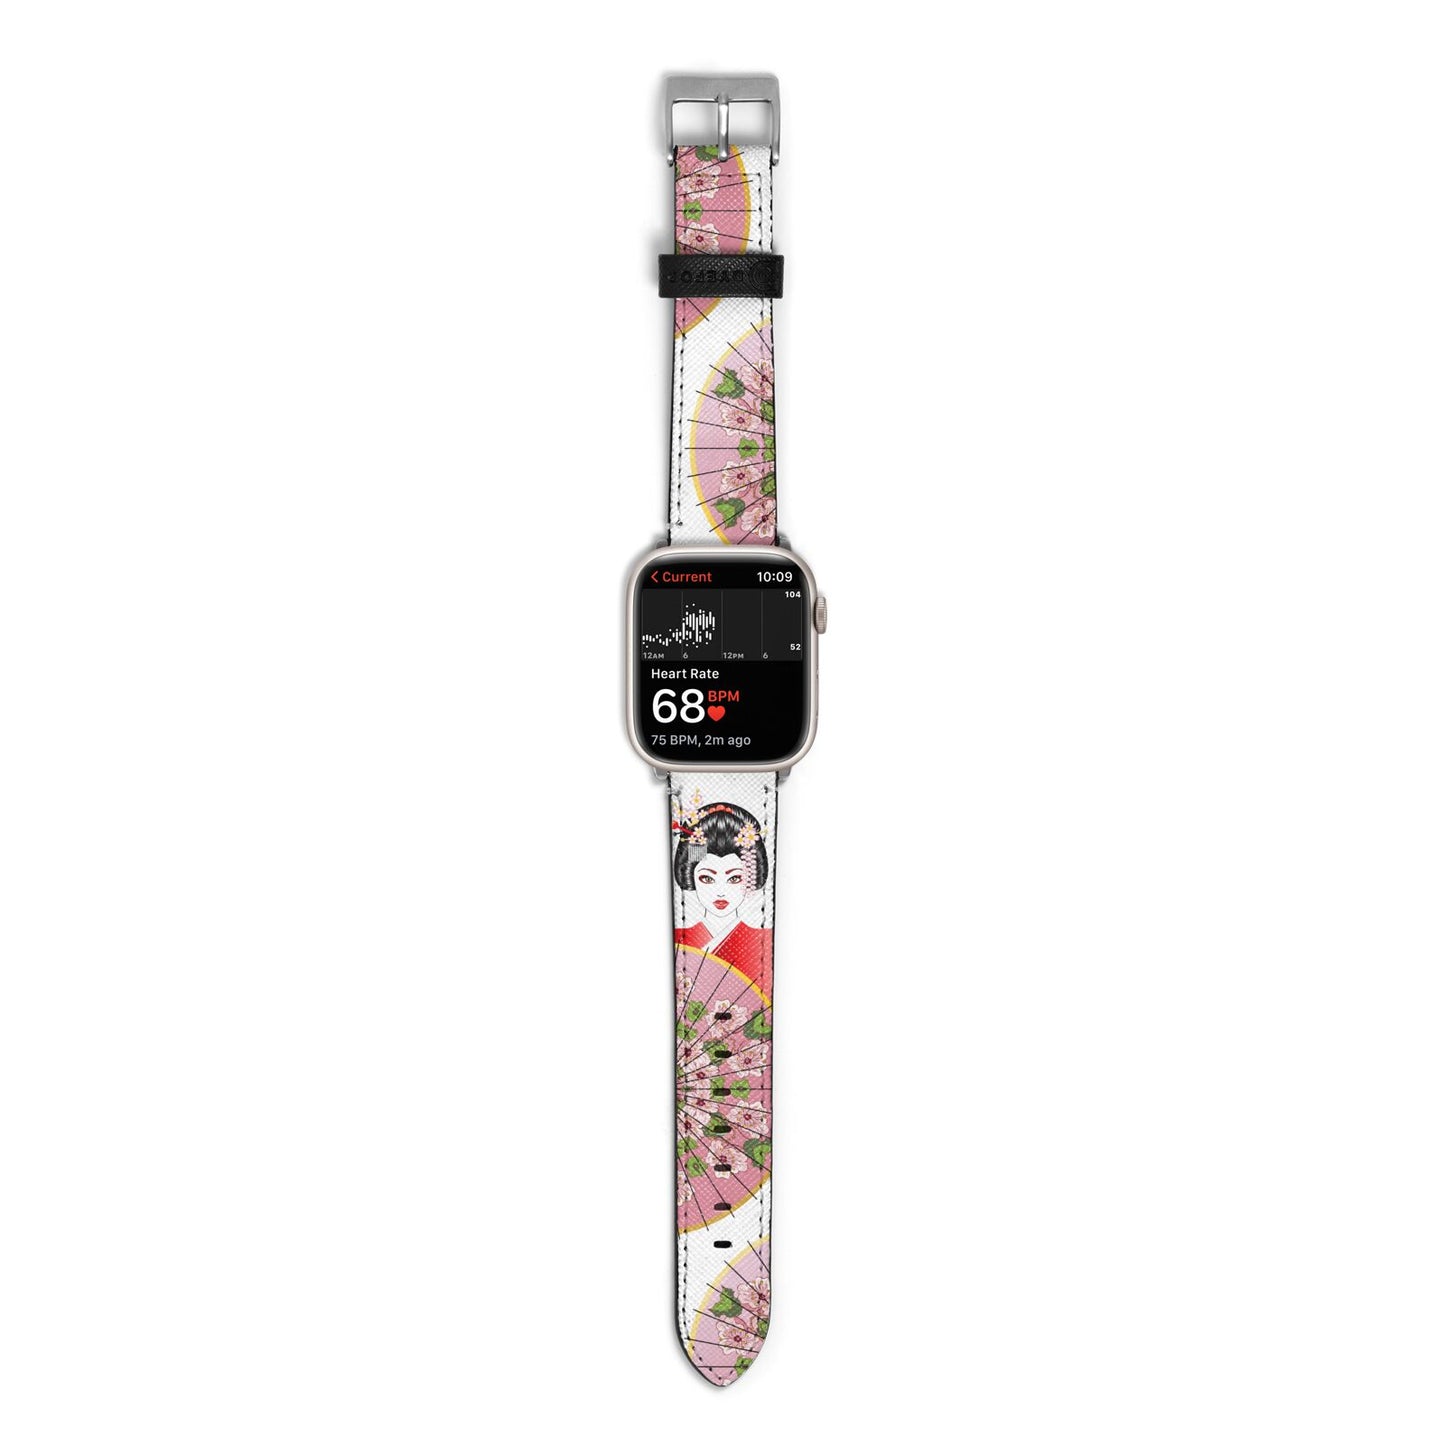 Geisha Girl Apple Watch Strap Size 38mm with Silver Hardware